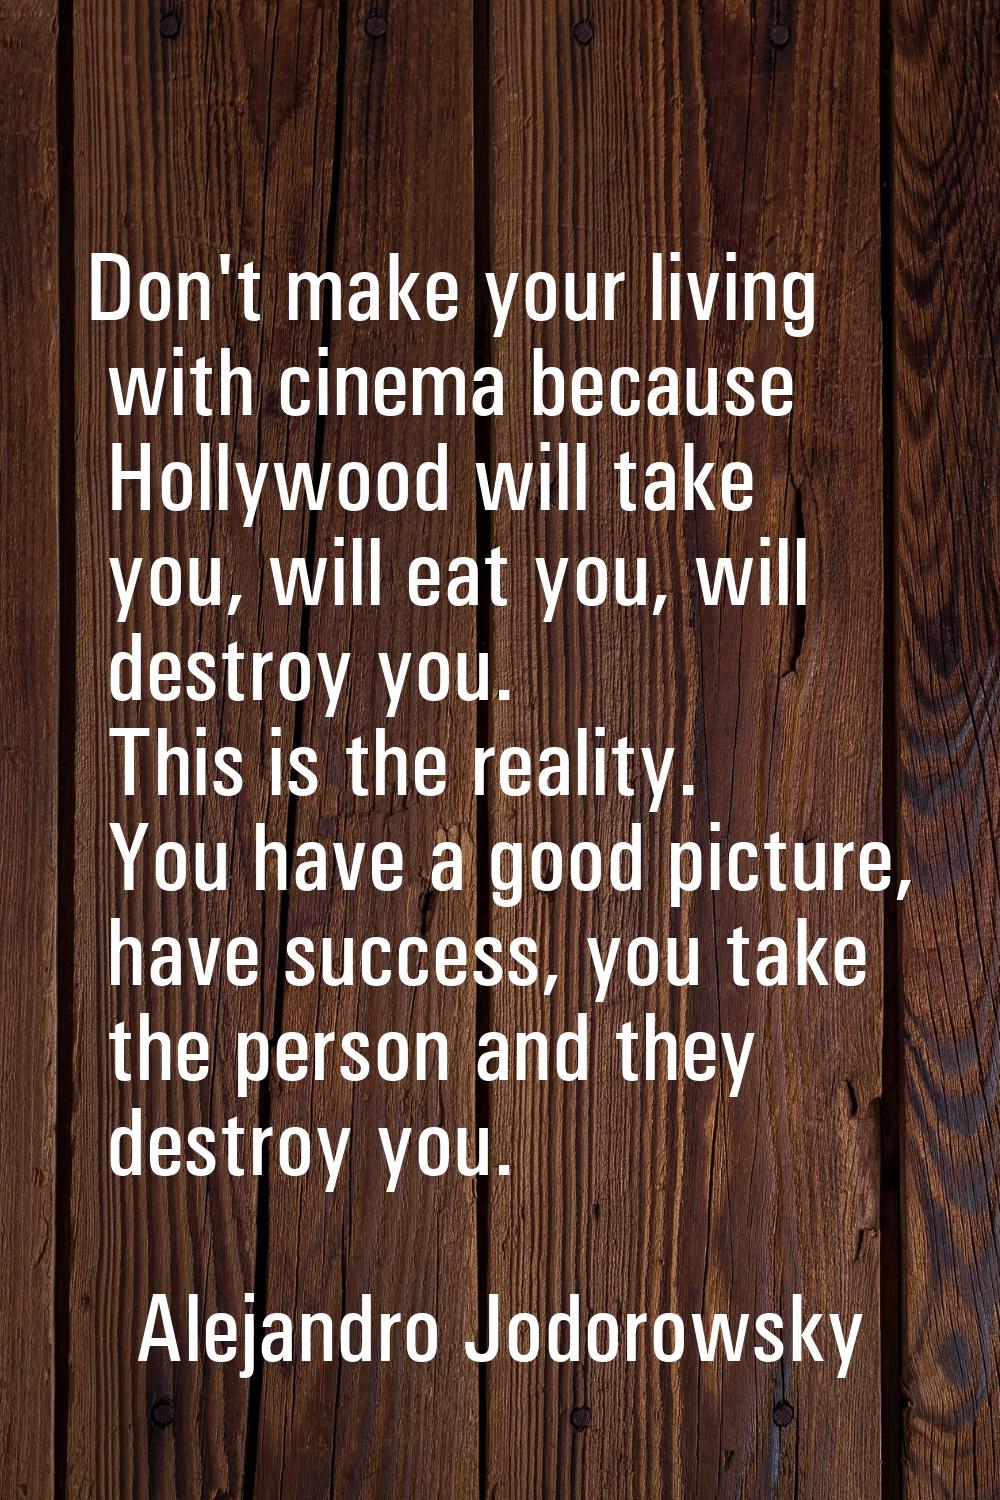 Don't make your living with cinema because Hollywood will take you, will eat you, will destroy you.